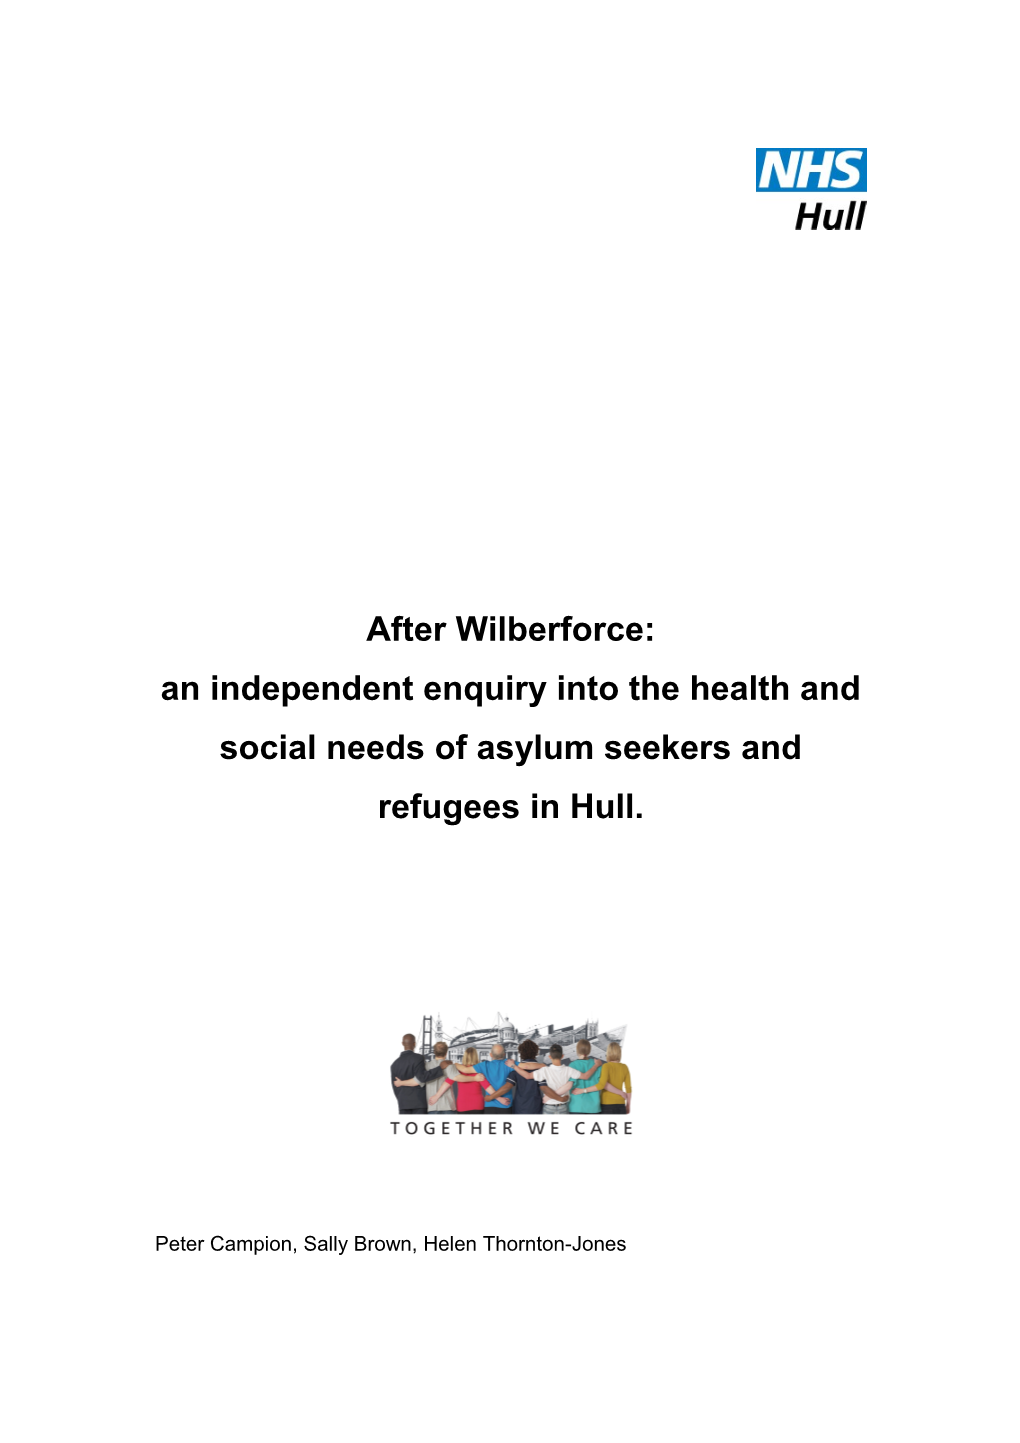 The Health and Social Needs of Asylum Seekers and Refugees in Hull